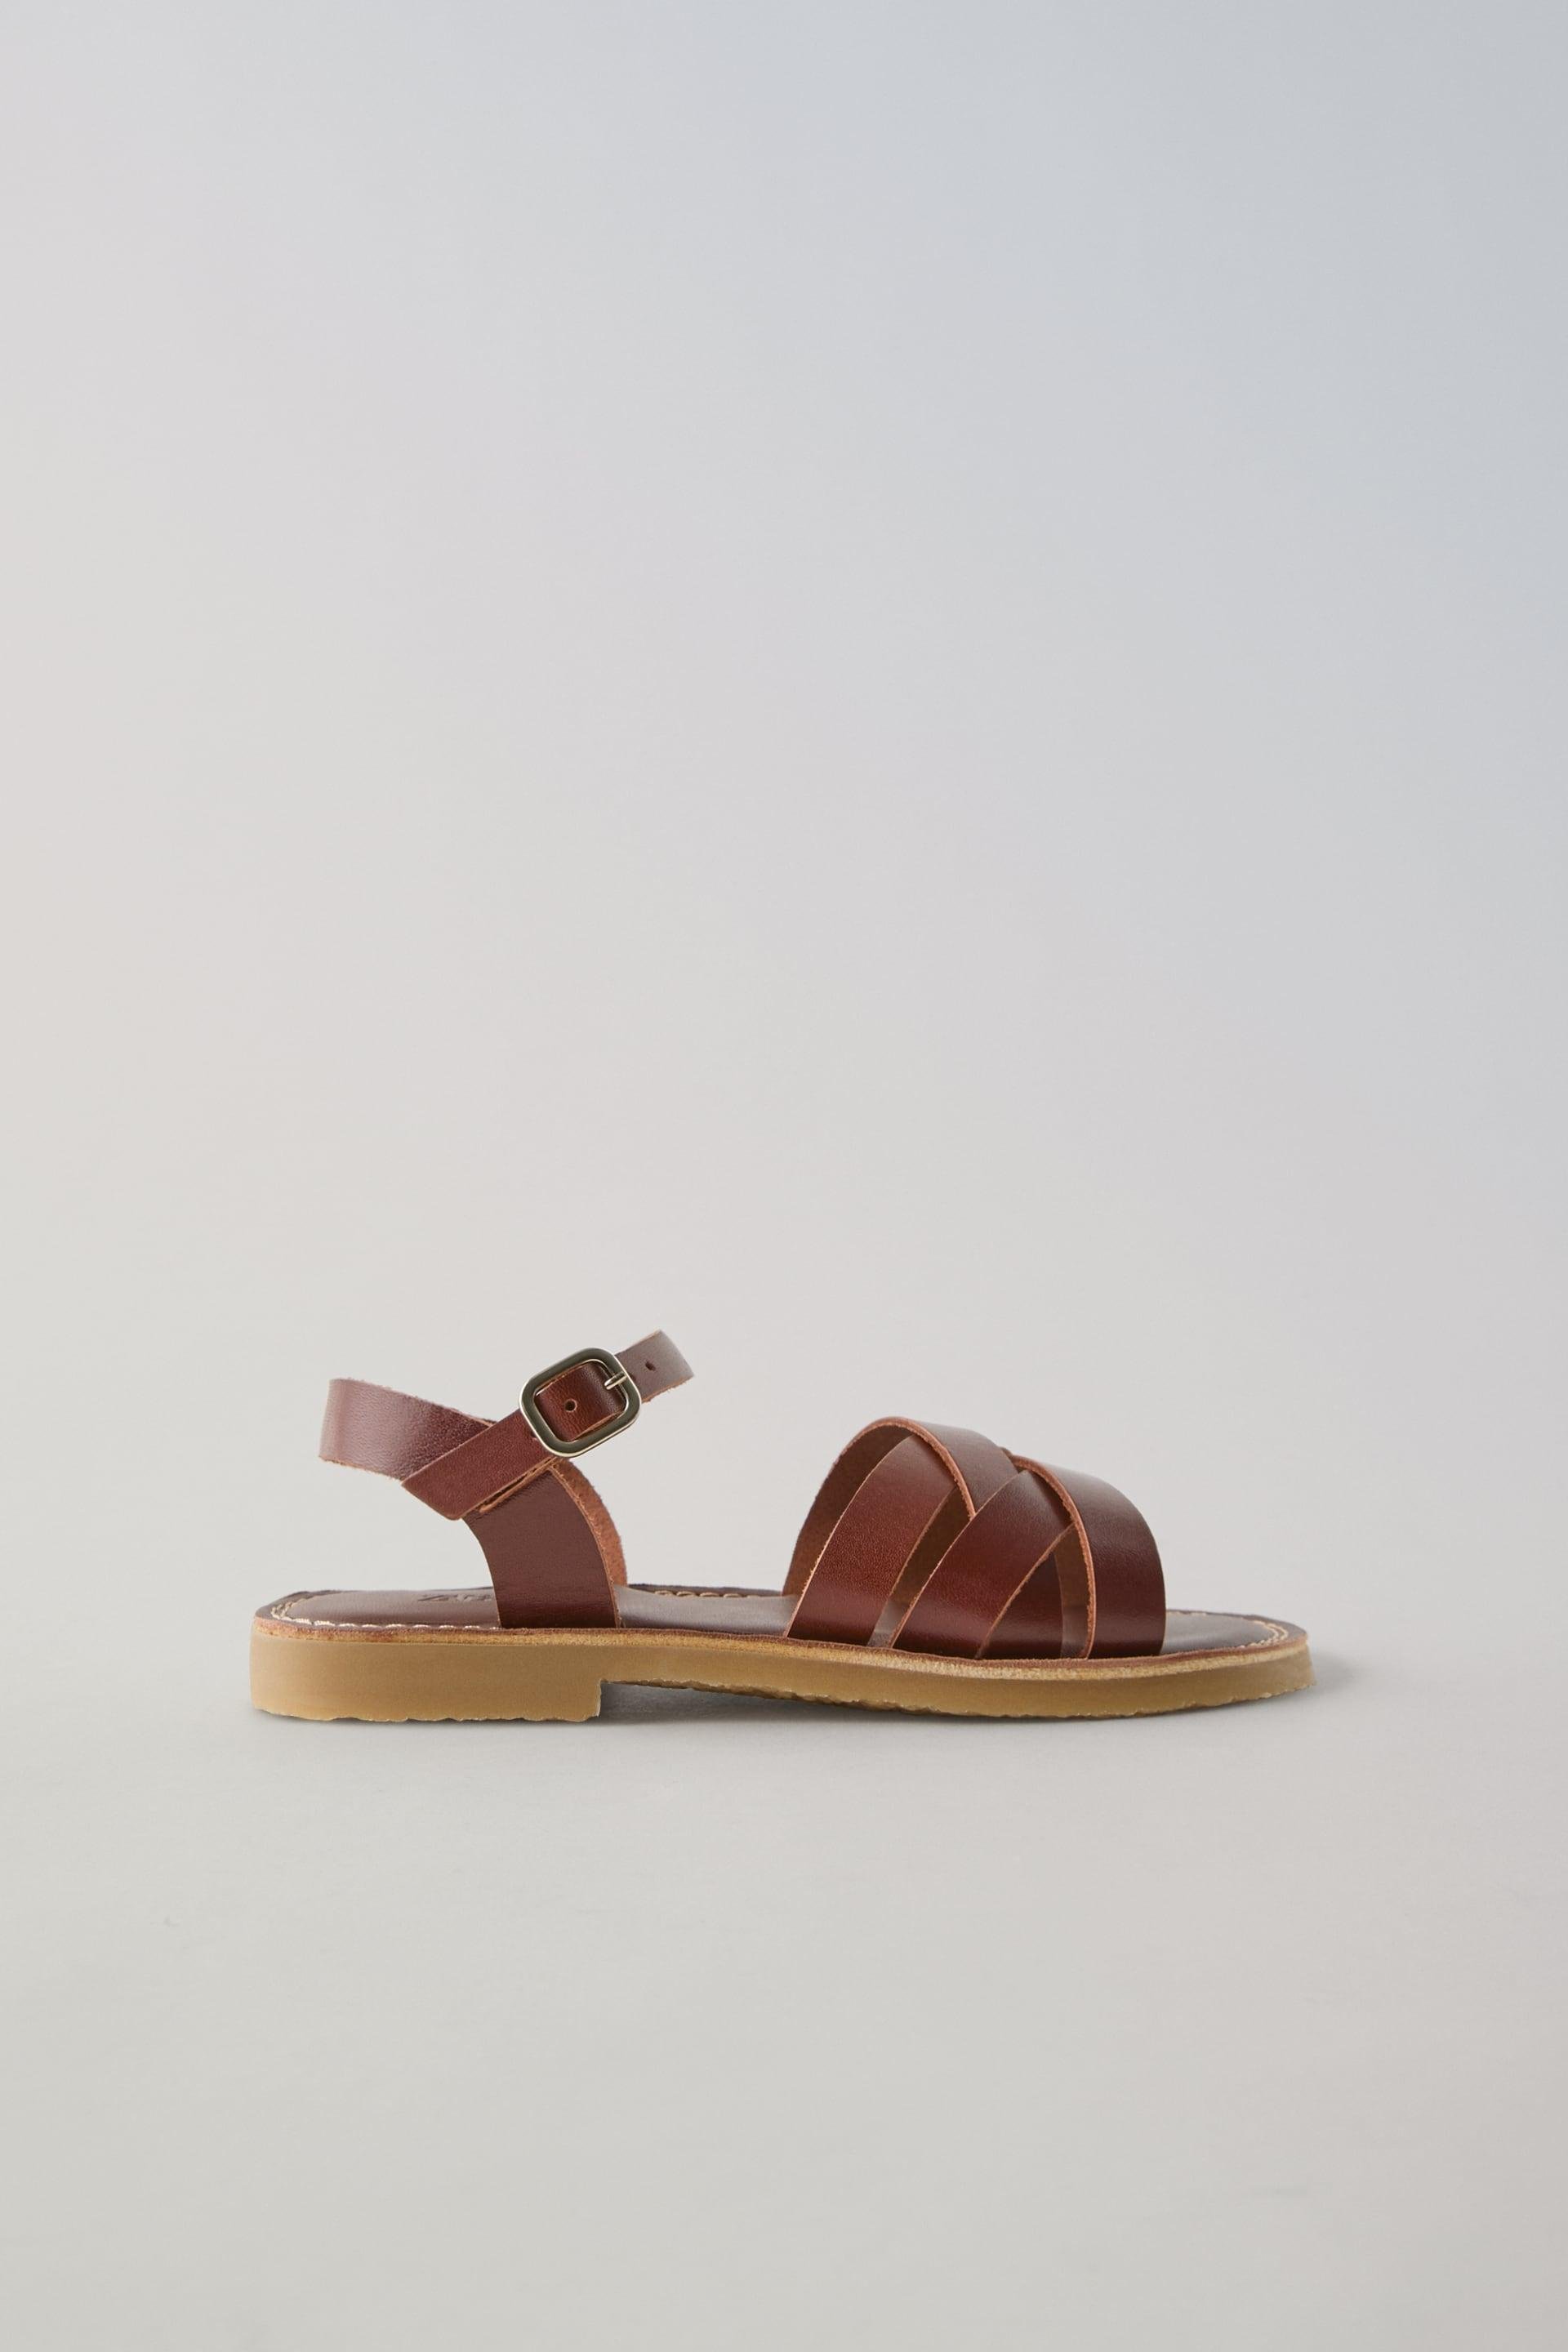 CROSSED STRAP LEATHER SANDALS by ZARA